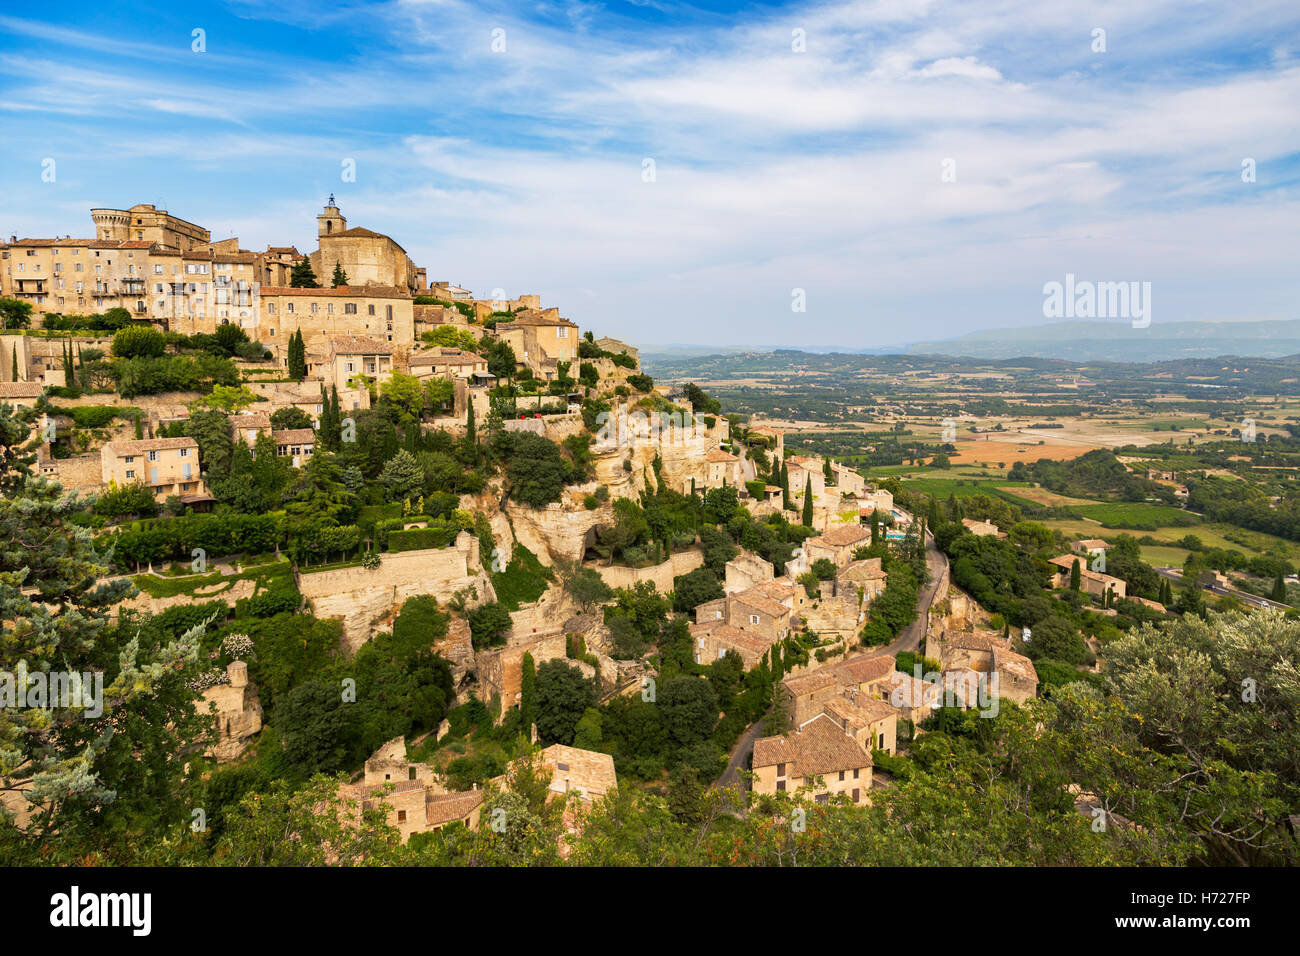 Gordes medieval village. Typical small town in Provence, Southern France. Stock Photo